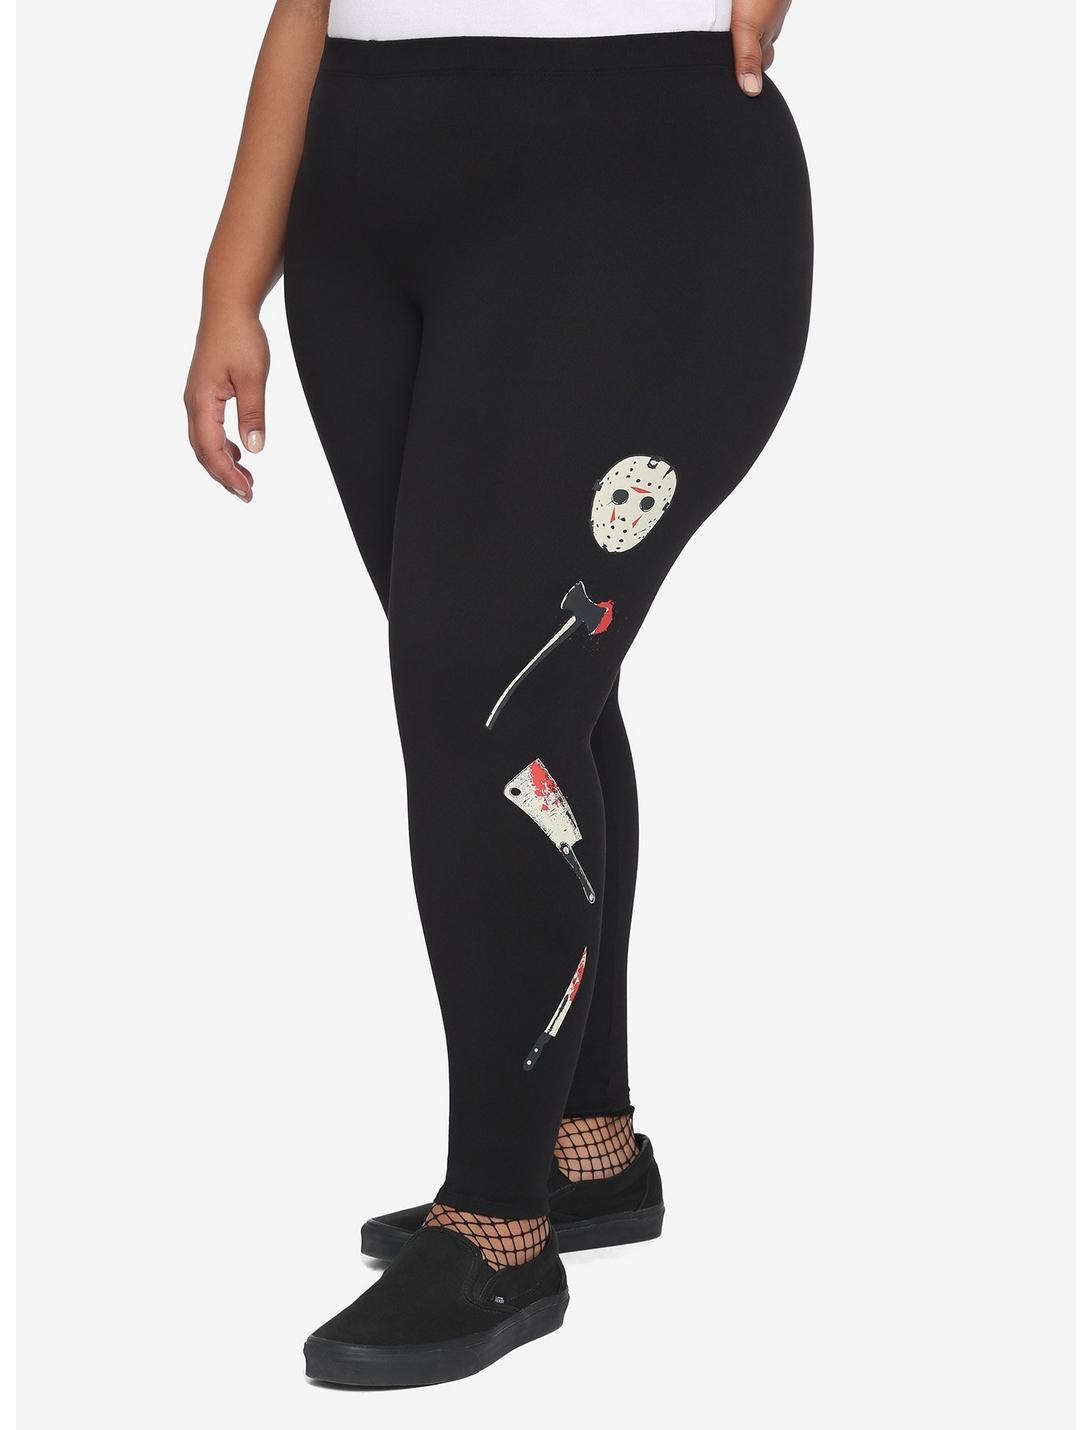 Friday The 13th Stacked Icons Leggings Plus Size, MULTI, hi-res